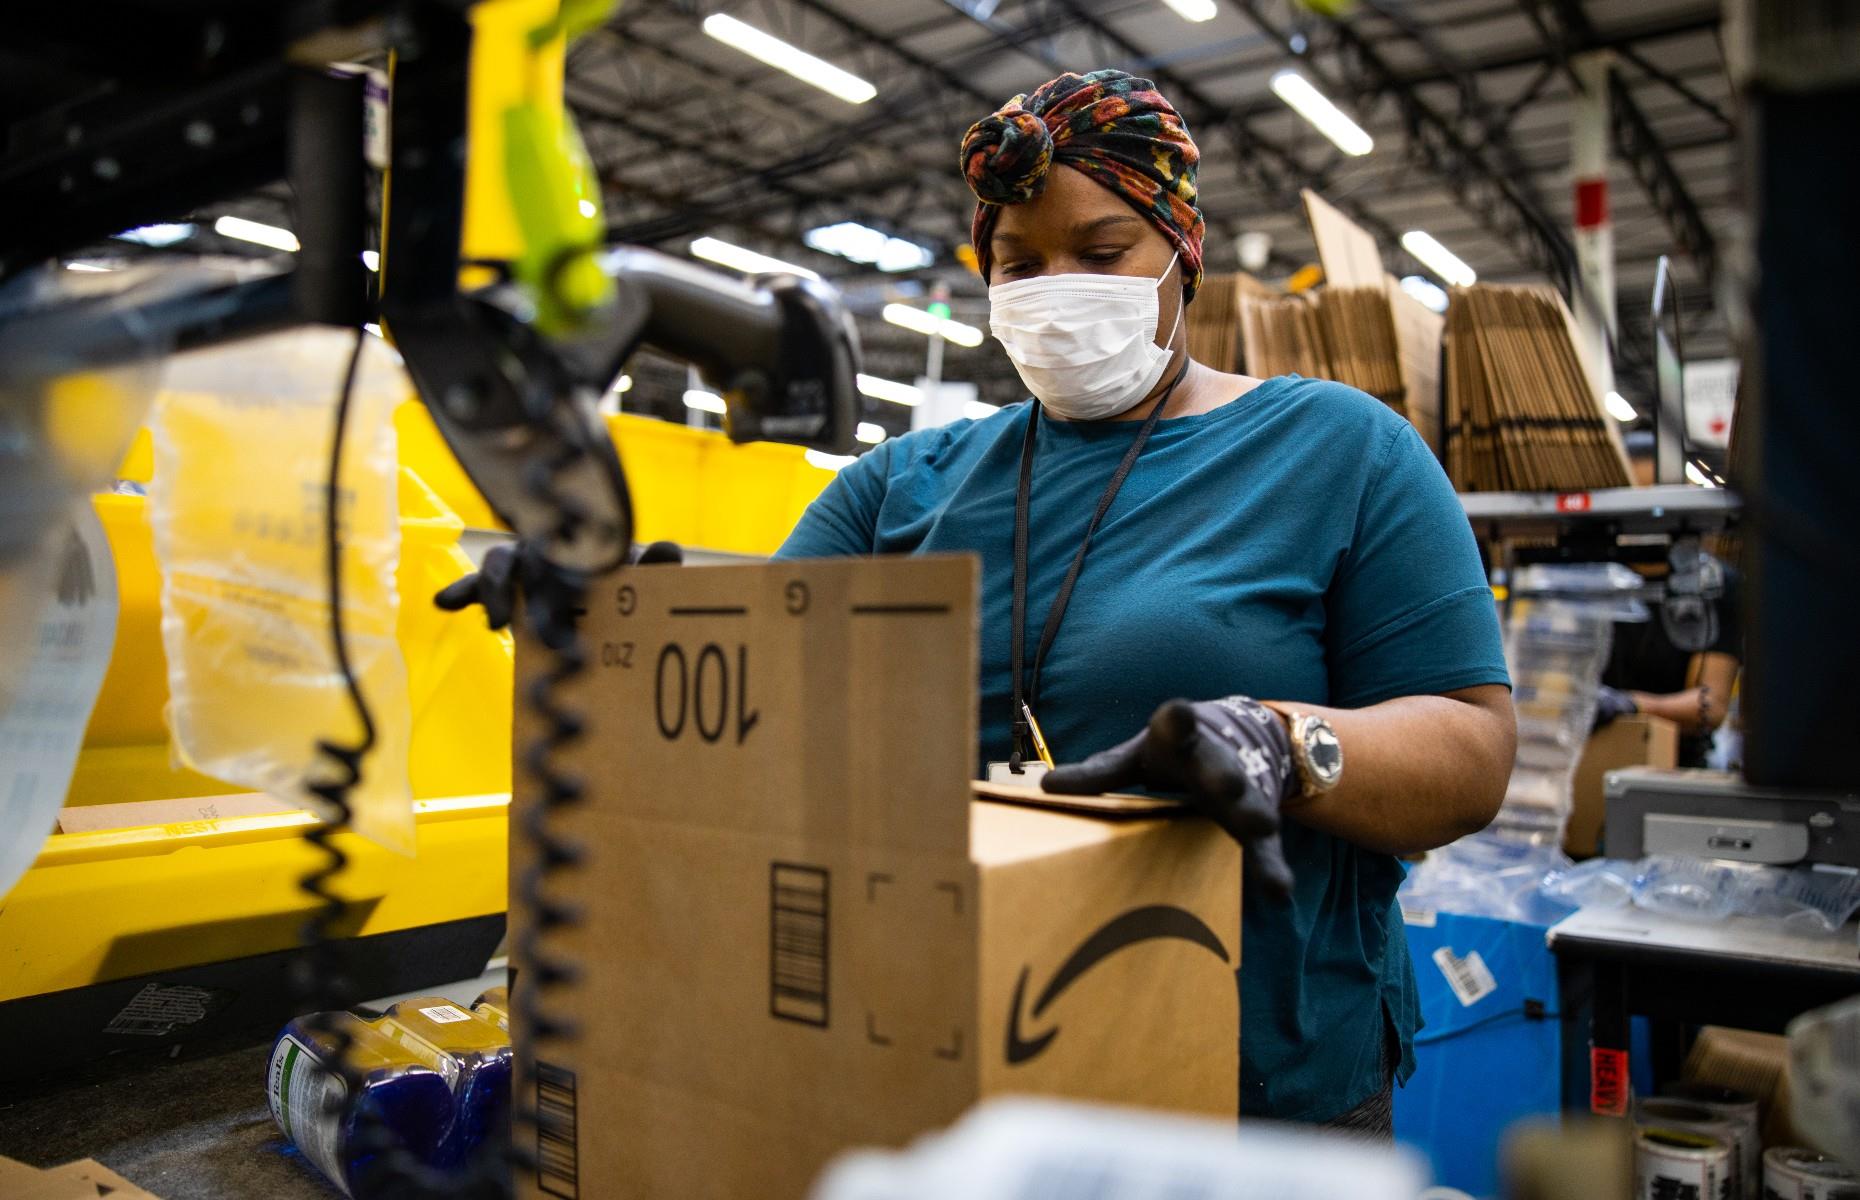 $100 for new Amazon workers